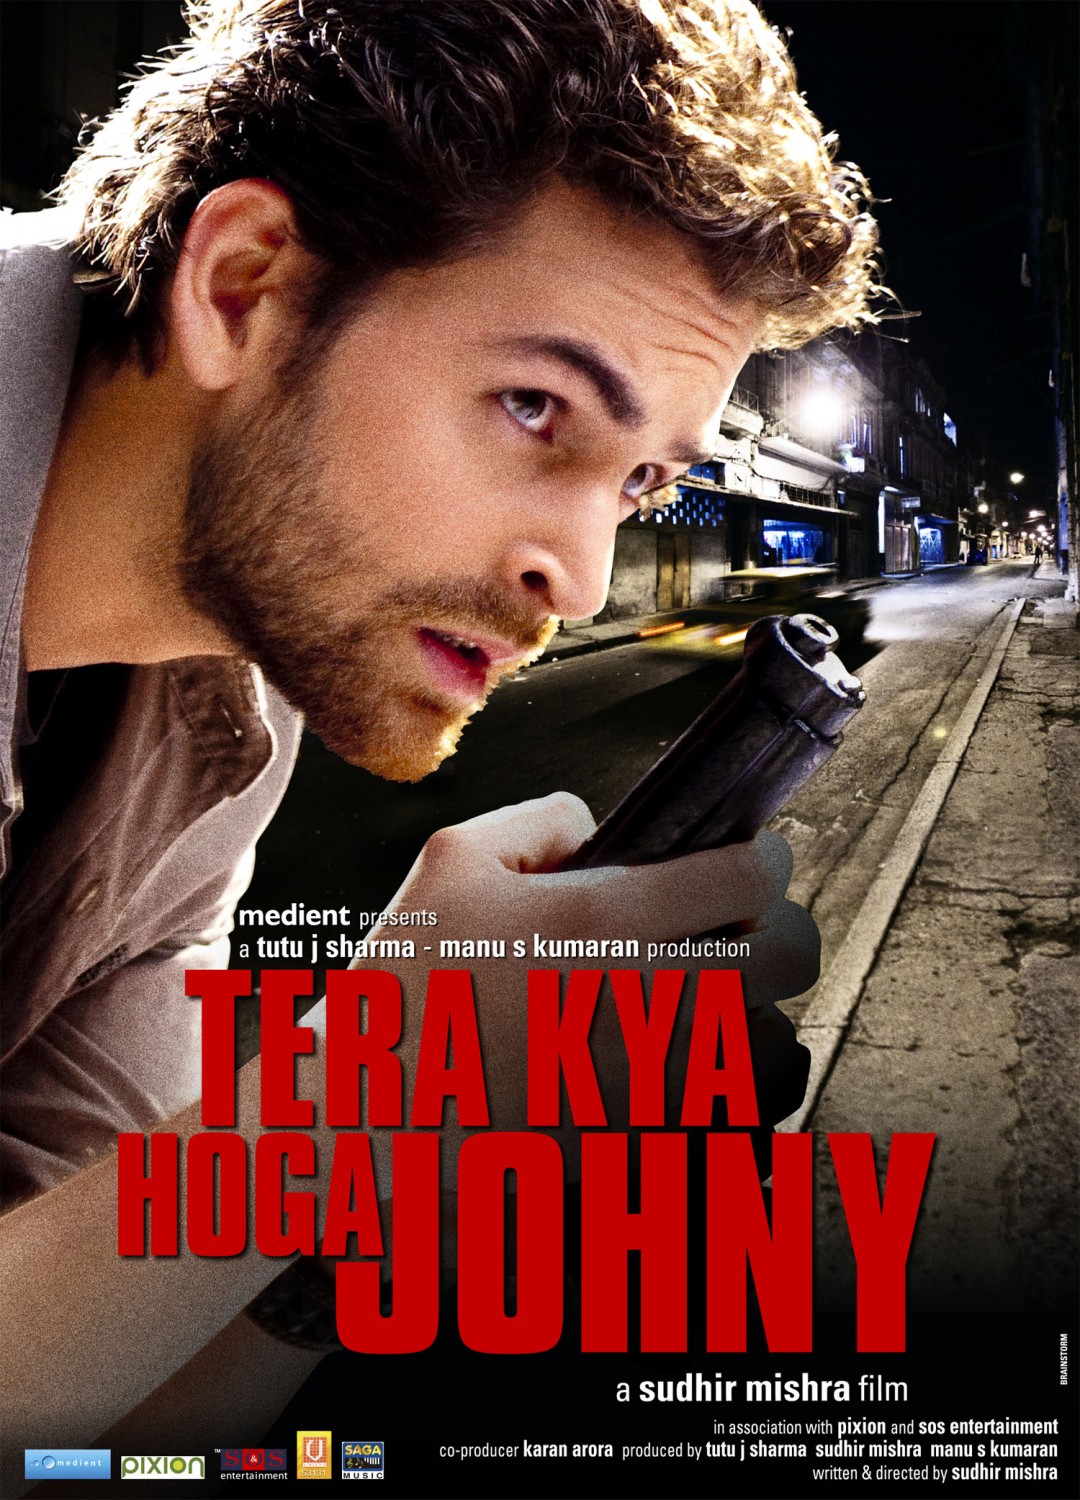 Extra Large Movie Poster Image for Tera Kya Hoga Johnny (#3 of 4)